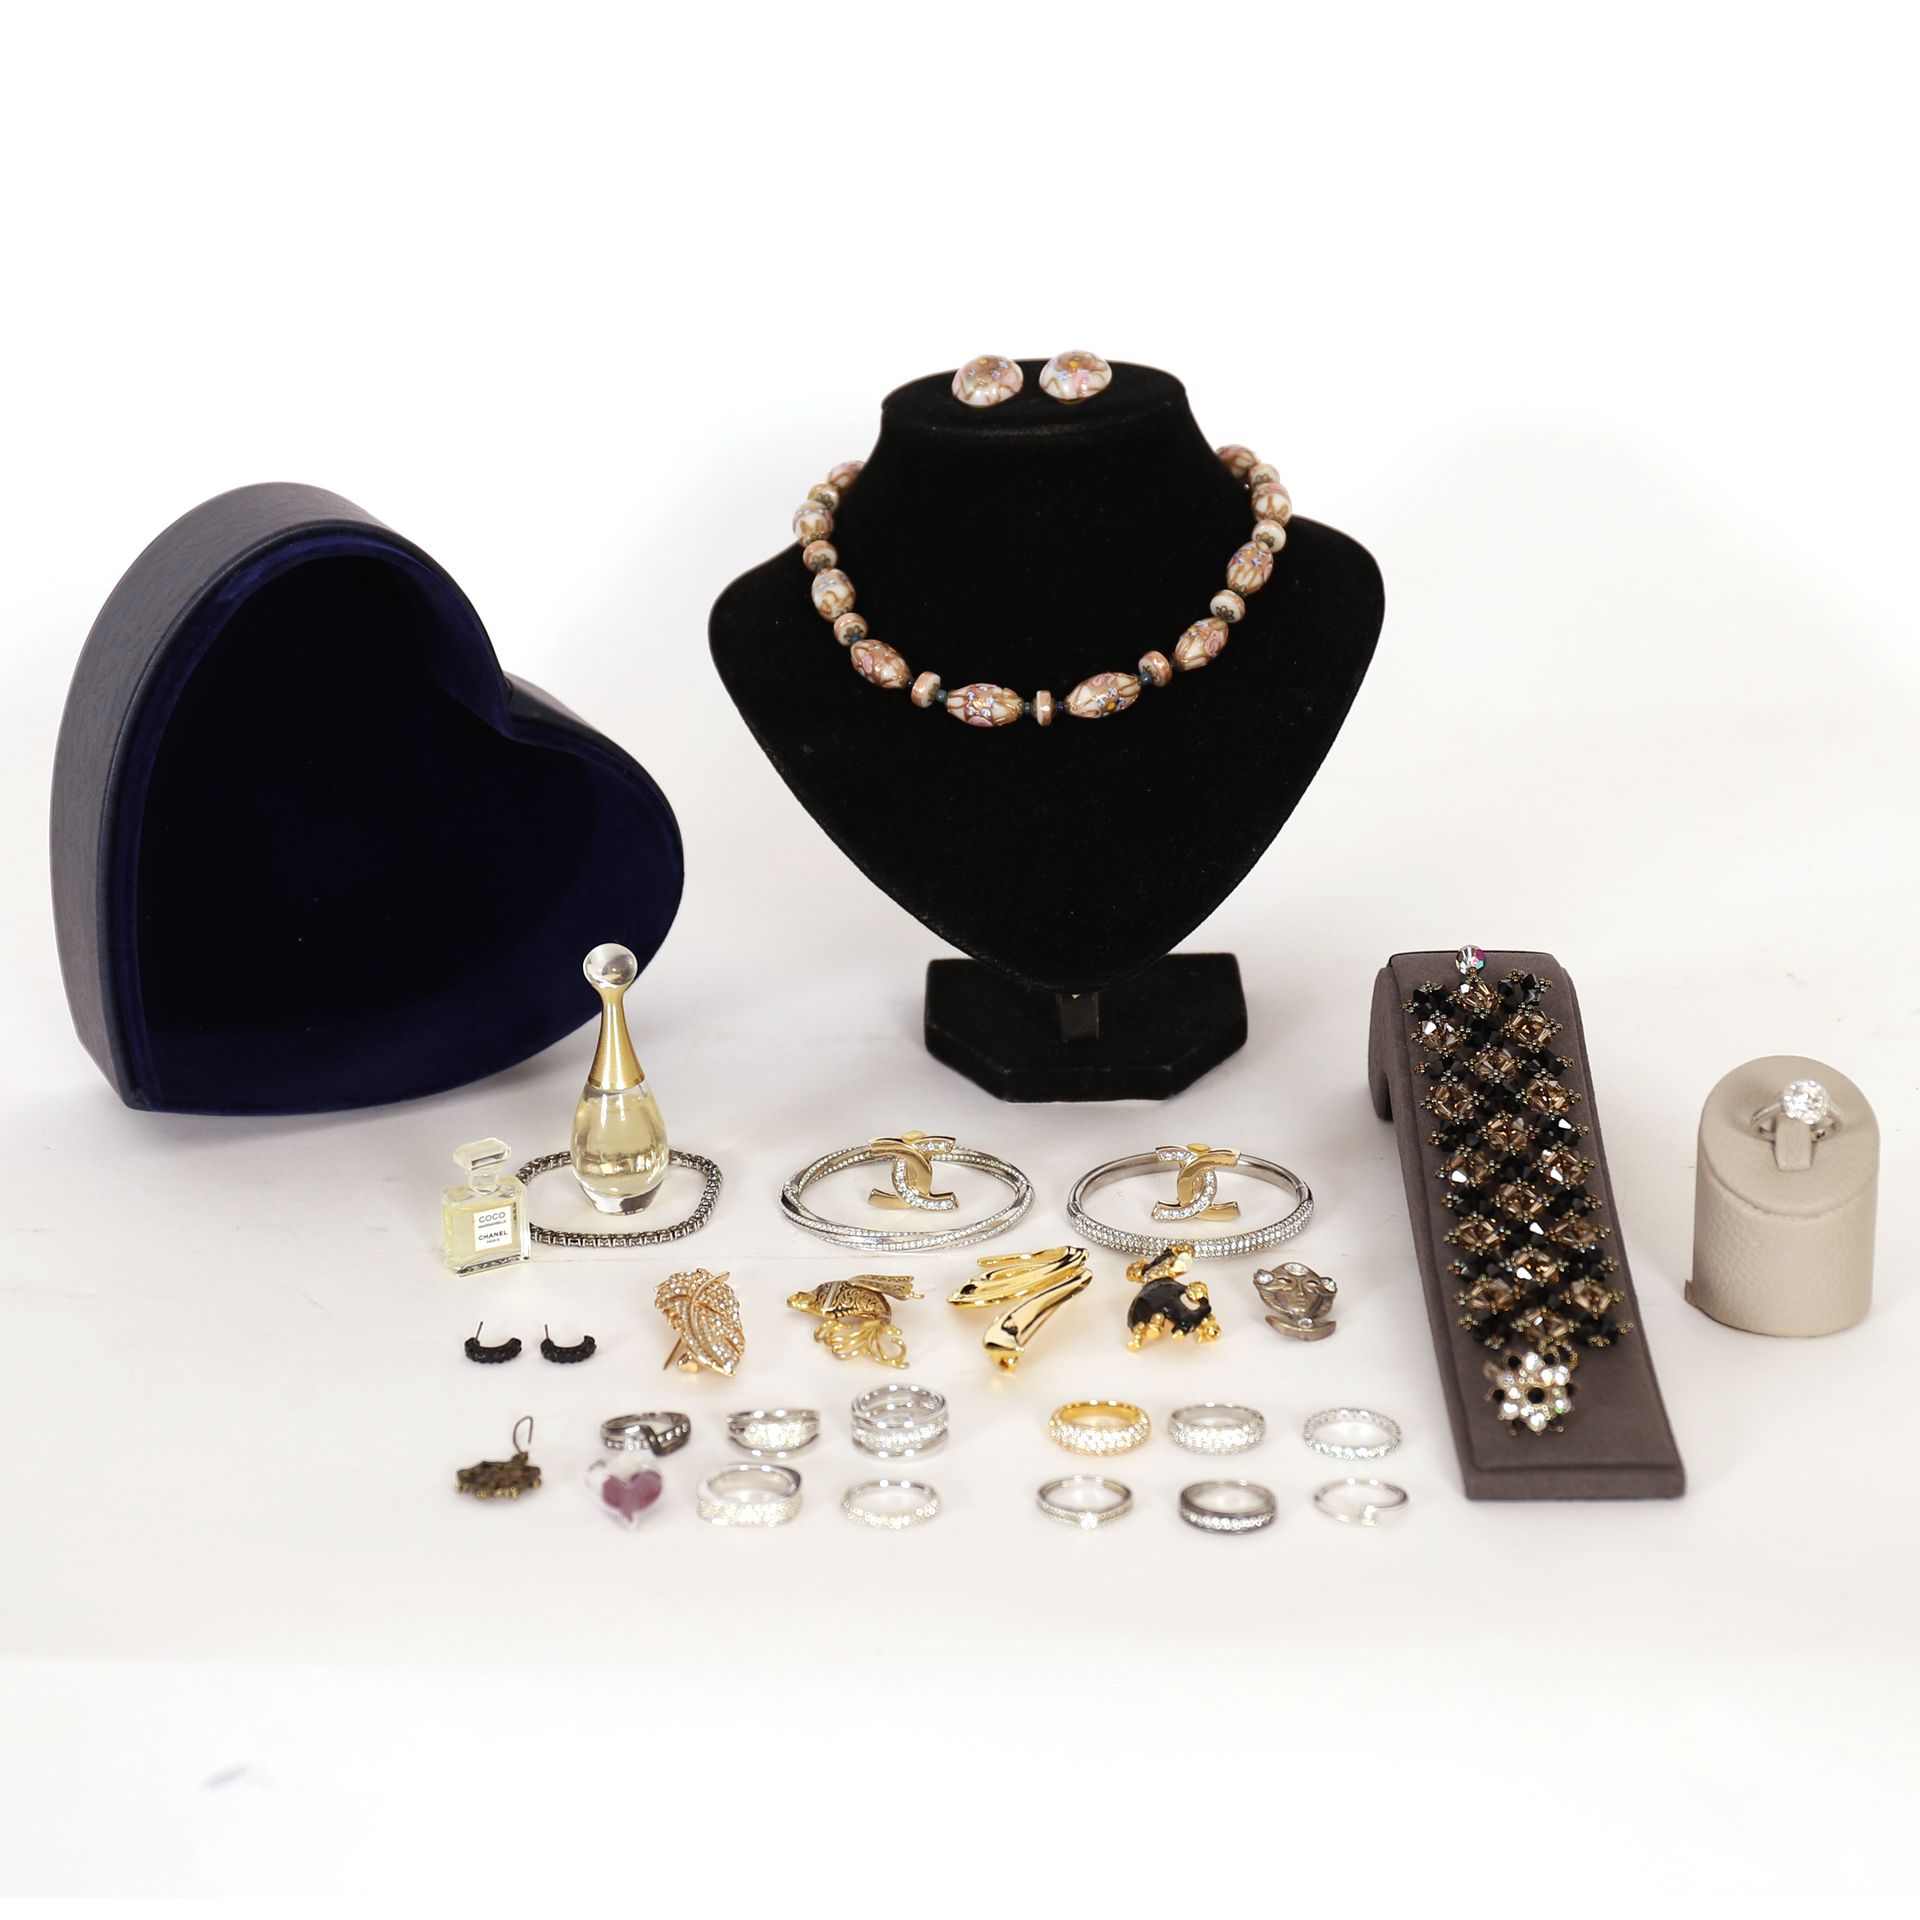 Null STRONG LOT OF COSTUME JEWELRY MOSTLY SWAROVSKI

Including a pair of ear cli&hellip;